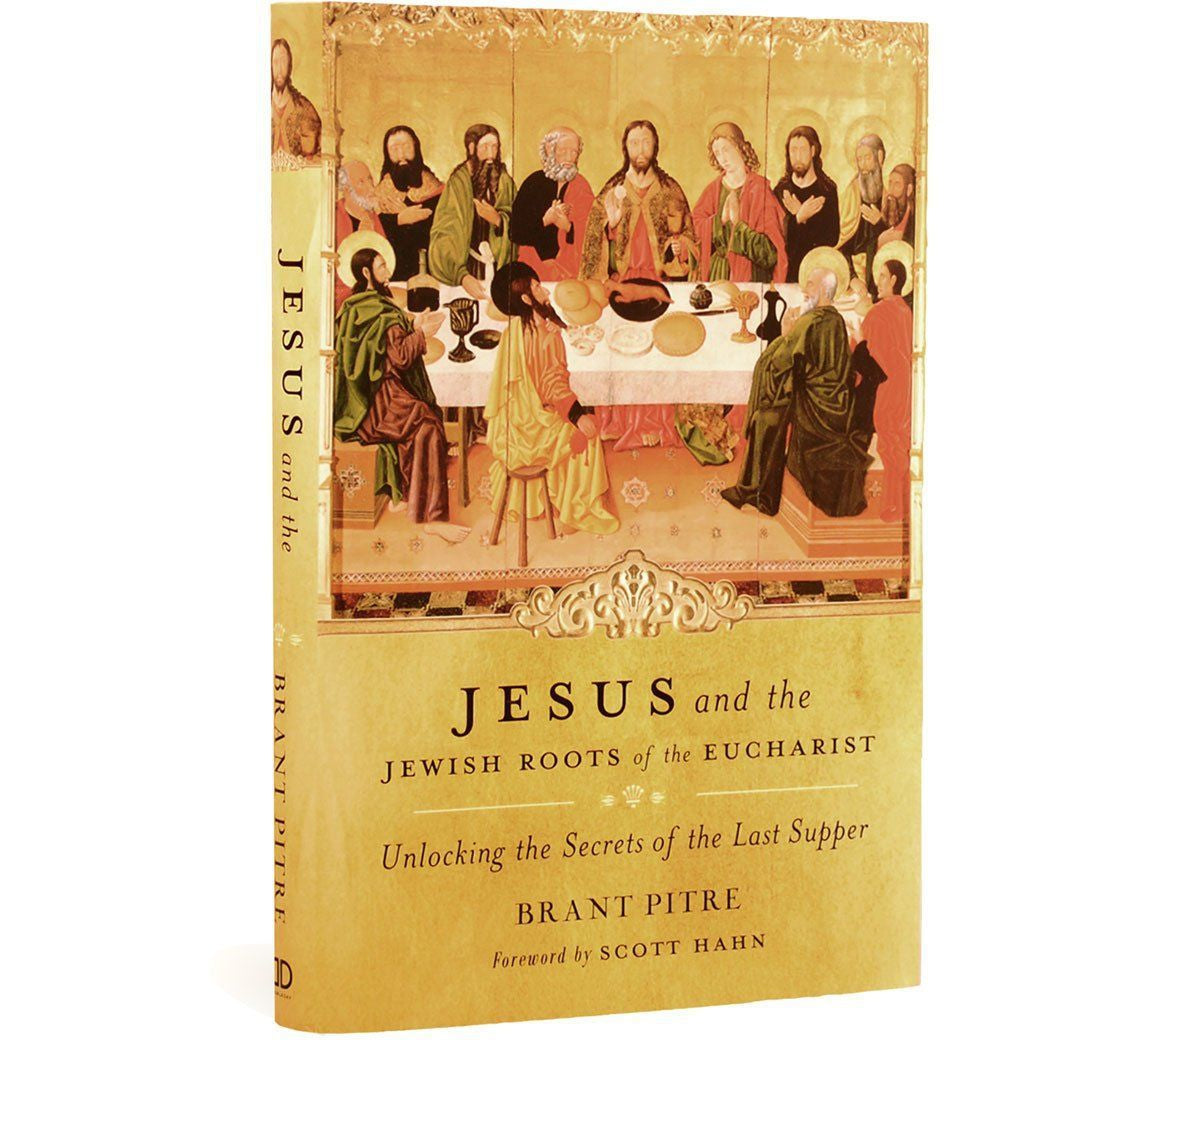 Jesus and the Jewish Roots of the Eucharist by Brant Pitre (Book)